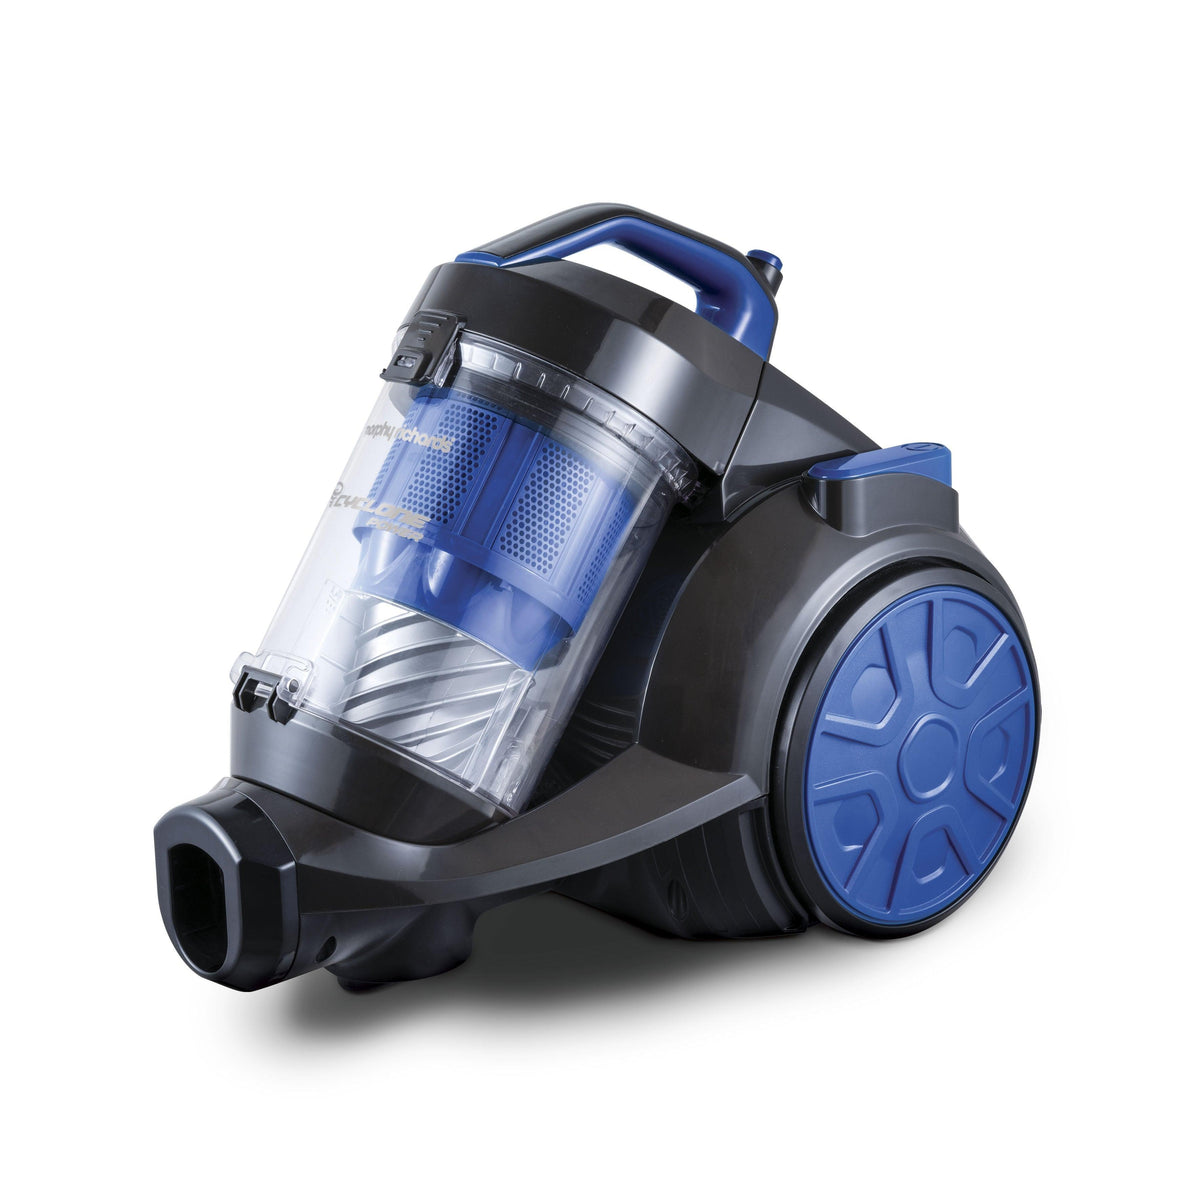 Morphy Richards Multi Cyclonic Bagless Cylinder Vacuum Cleaner - Graphite &amp; Blue (7245578633404)